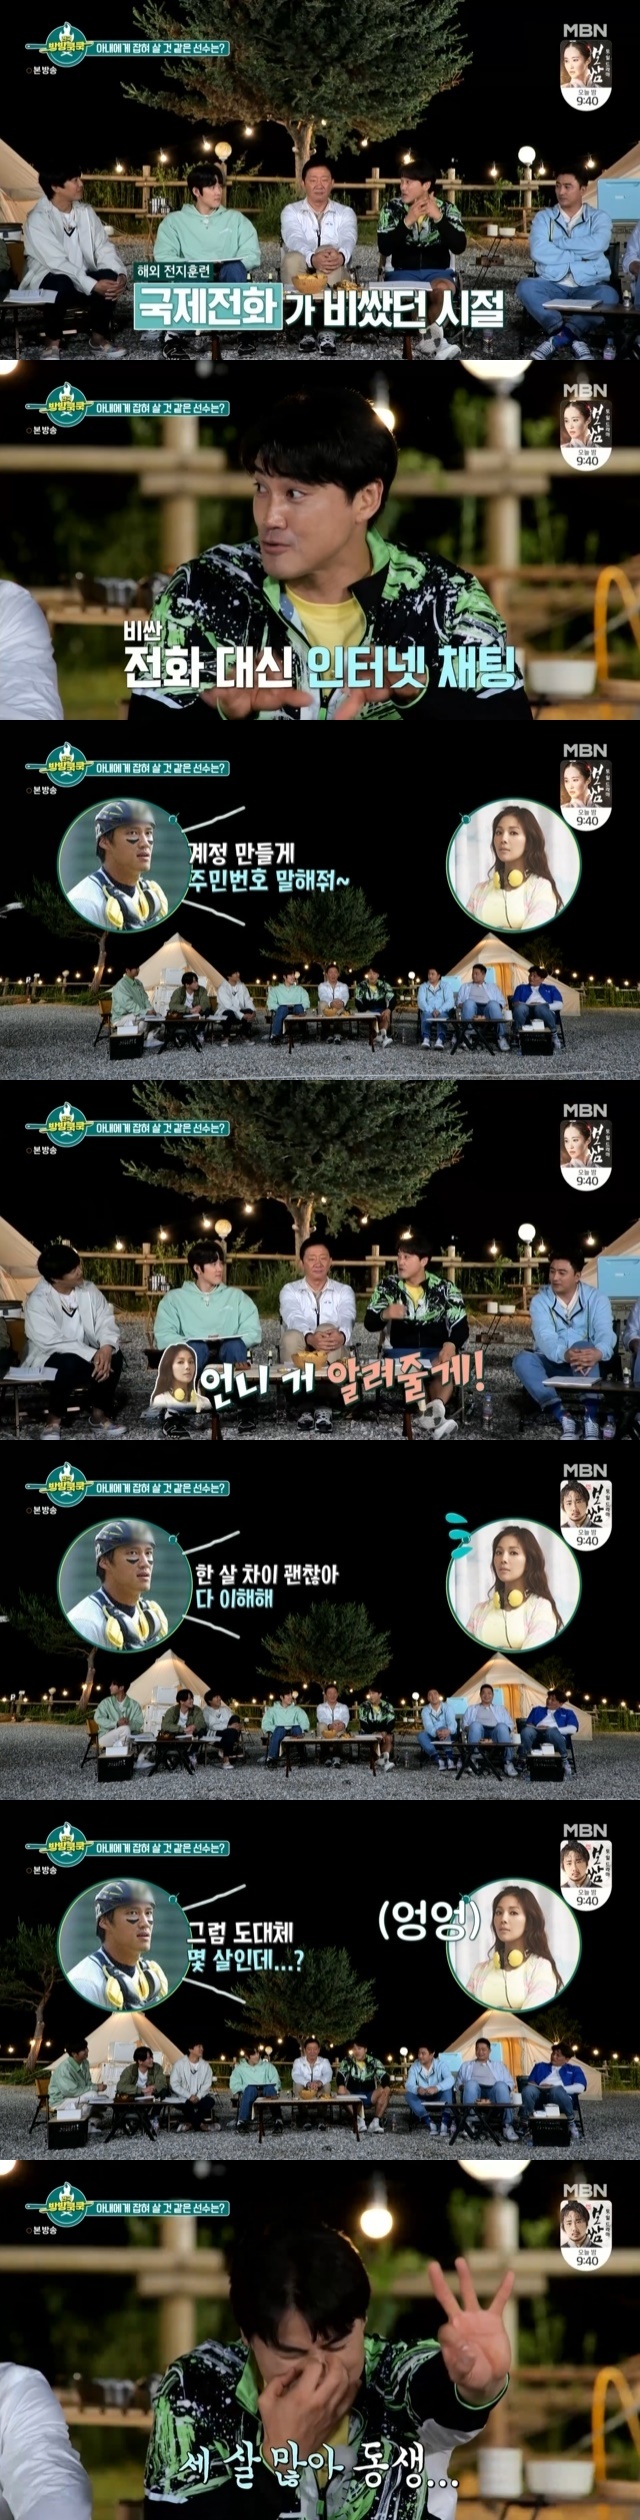 Hong Sung-heon has released an anecdote that his wife Kim Jung Im deceived his age during Love.In the 12th MBN entertainment National Cook Cooking broadcast on June 26, Hur Jae, Hong Sung-heon, and Park Tae-hwan visited as guests.On this day, Hong Sung-heon received a lot of points from his wife as the most likely person to live.Hur Jae said, It seems that I am aware that I go with my wife every time.Later, Hong Sung-heon released an episode with his wife Kim Jung Im, saying he did not know that his wife was older during his Love years.When I met, I thought I was the same age as I was in 76 years old.I went to battery training and I could chat on the Internet, so I made an account and asked me to give me my resident registration number.Eventually, she said, Ill tell you what I have, but it was strange there. She wanted to hide something from me. I honestly thought it was a year difference. The difference between one year old is okay. My father understands that much.I was a few years old, but I cried and said that I was three years old.